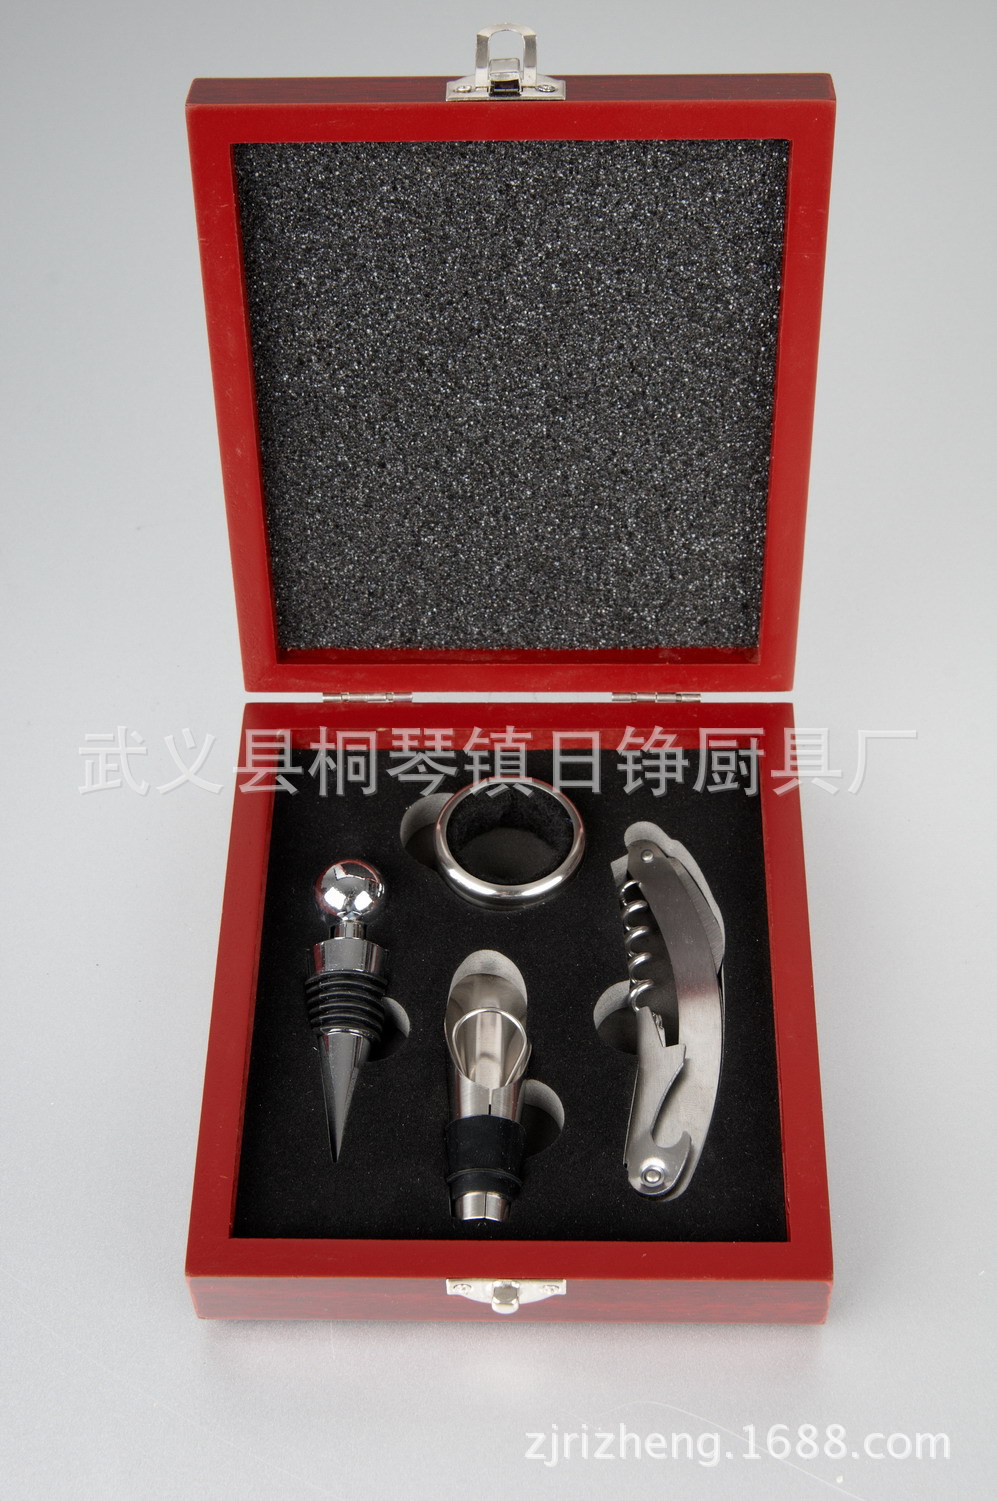 Foreign Trade Hot Selling Red Wine Tools Four-piece Stainless Steel Gift Wine Corkscrew Red Wine Wine Set Wholesale